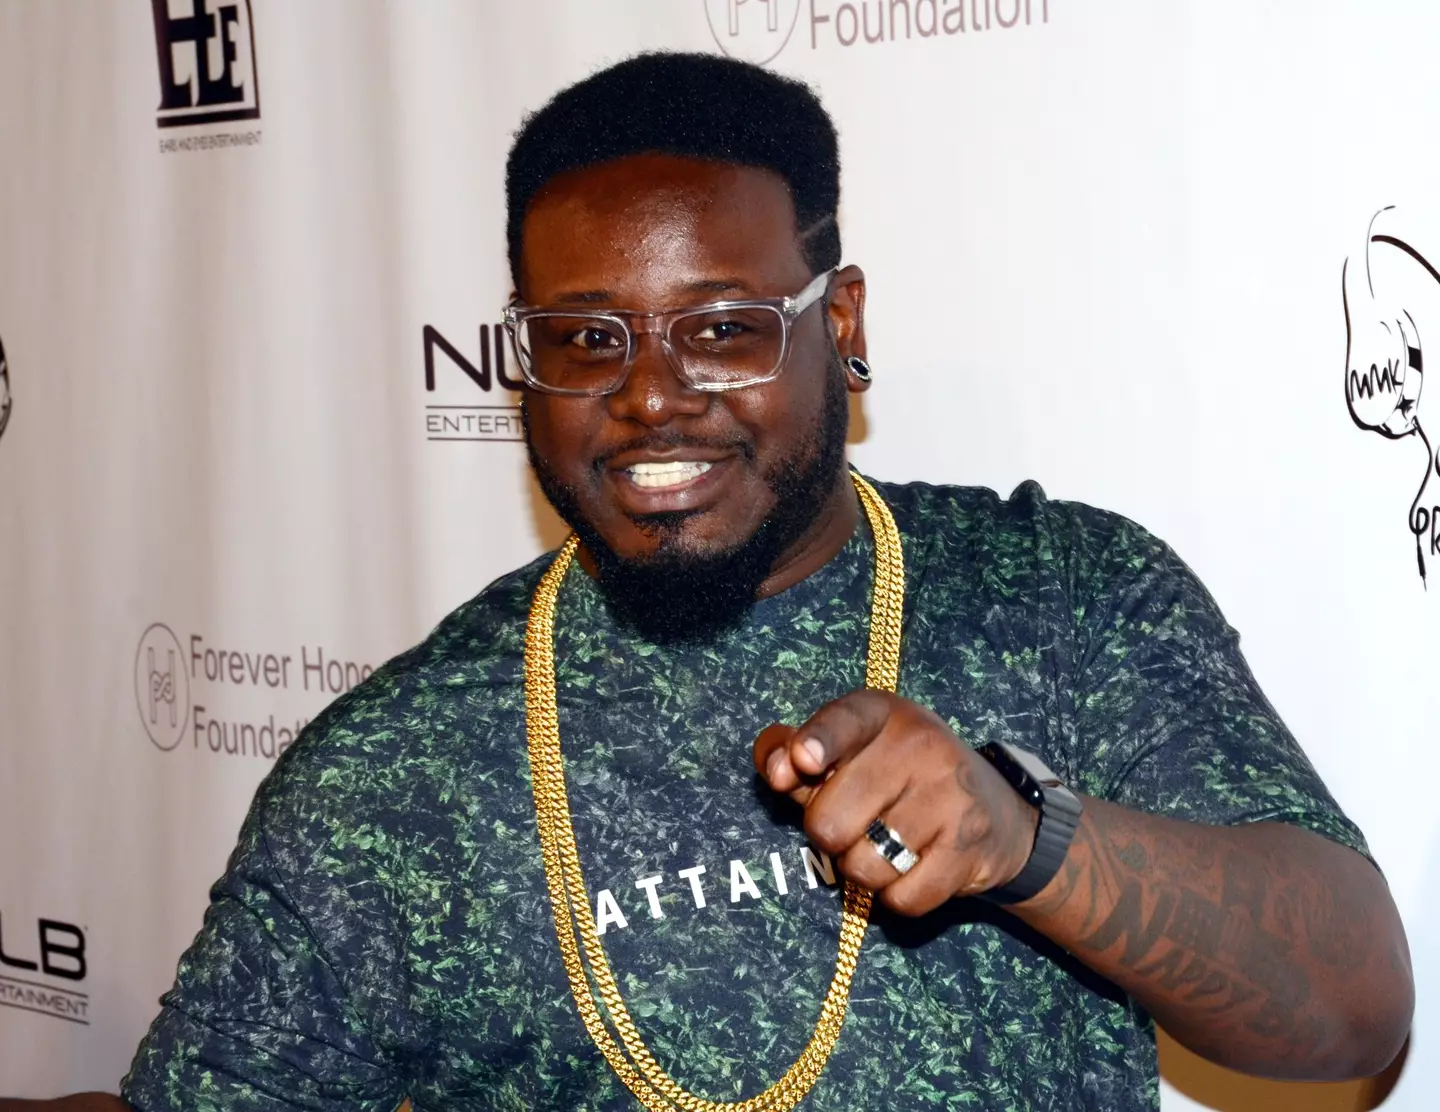 T-Pain created a huger debate by sharing these speculative figures.